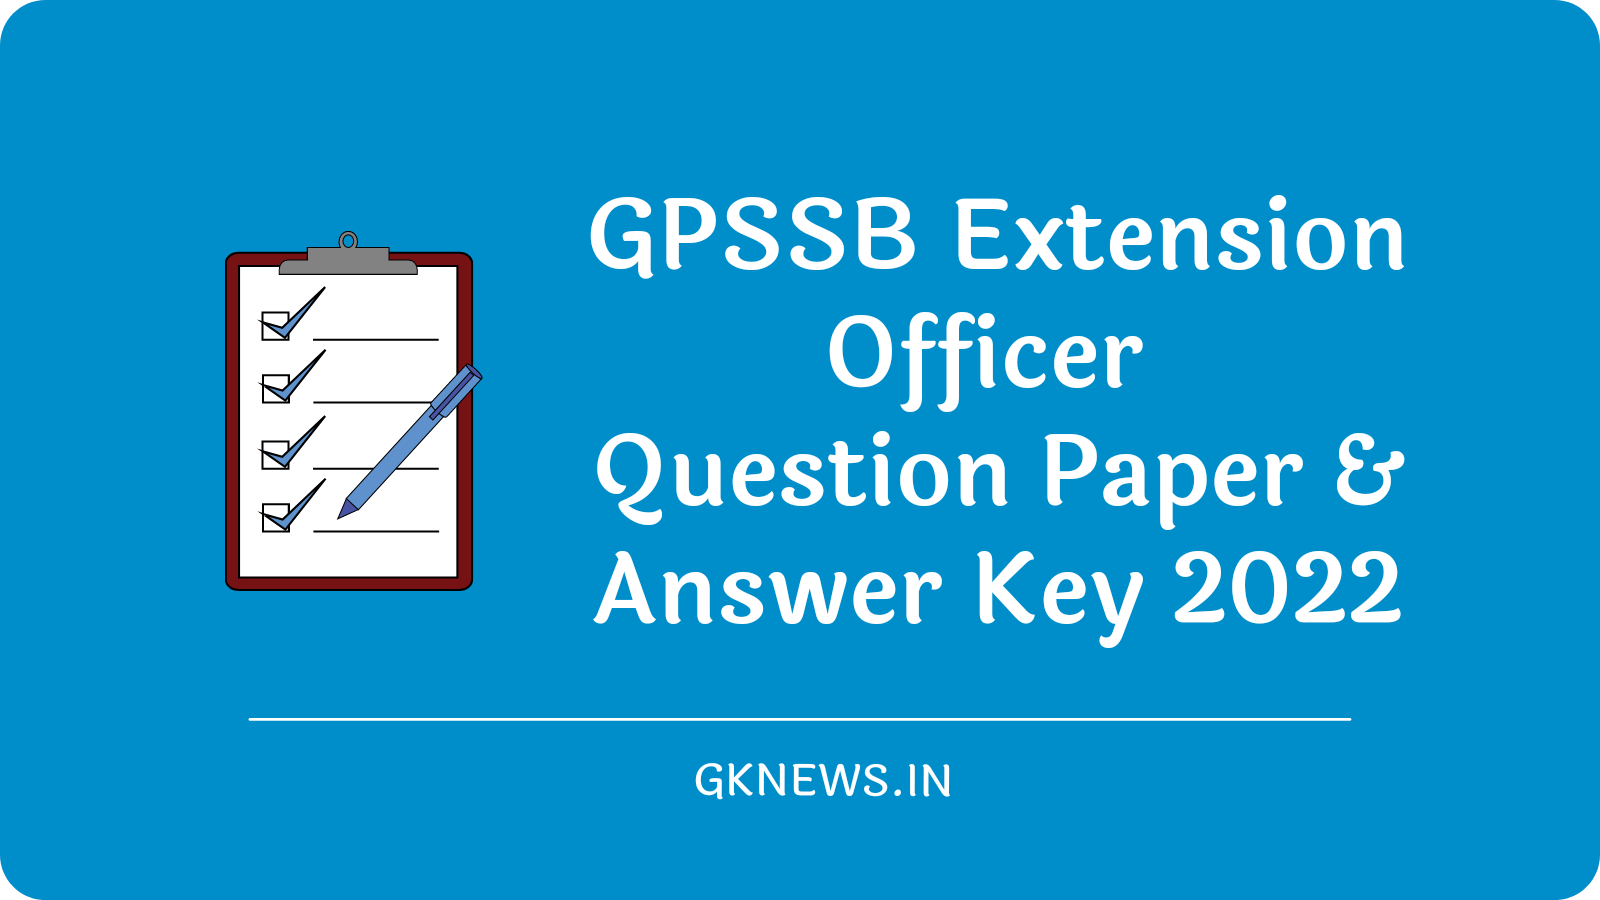 GPSSB Extension Officer Question Paper & Answer Key 2022